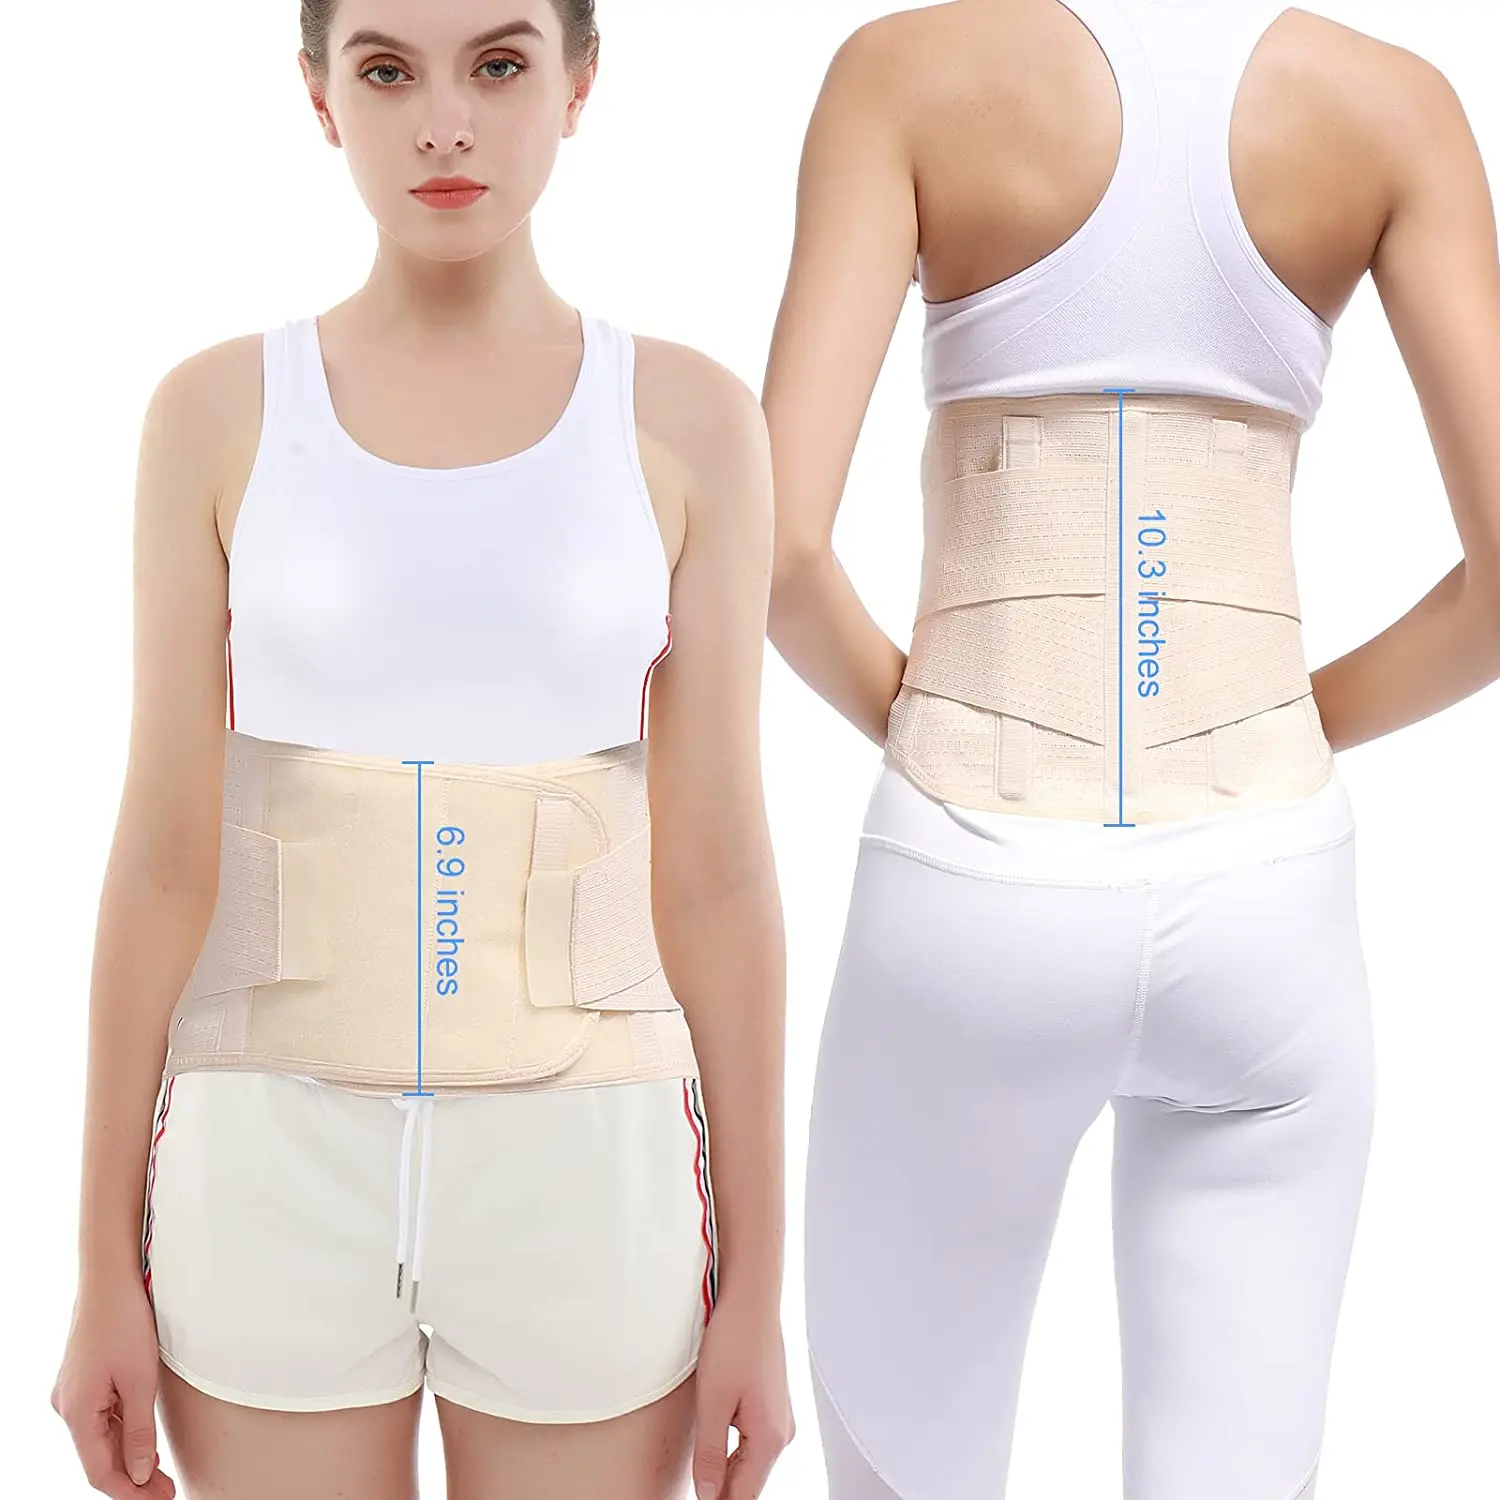 HKJD Anti-Skid Lumbar Support Belt Breathable Waist Lumbar Lower Back Brace For Sciatica  Herniated Disc  Relief Back Pain